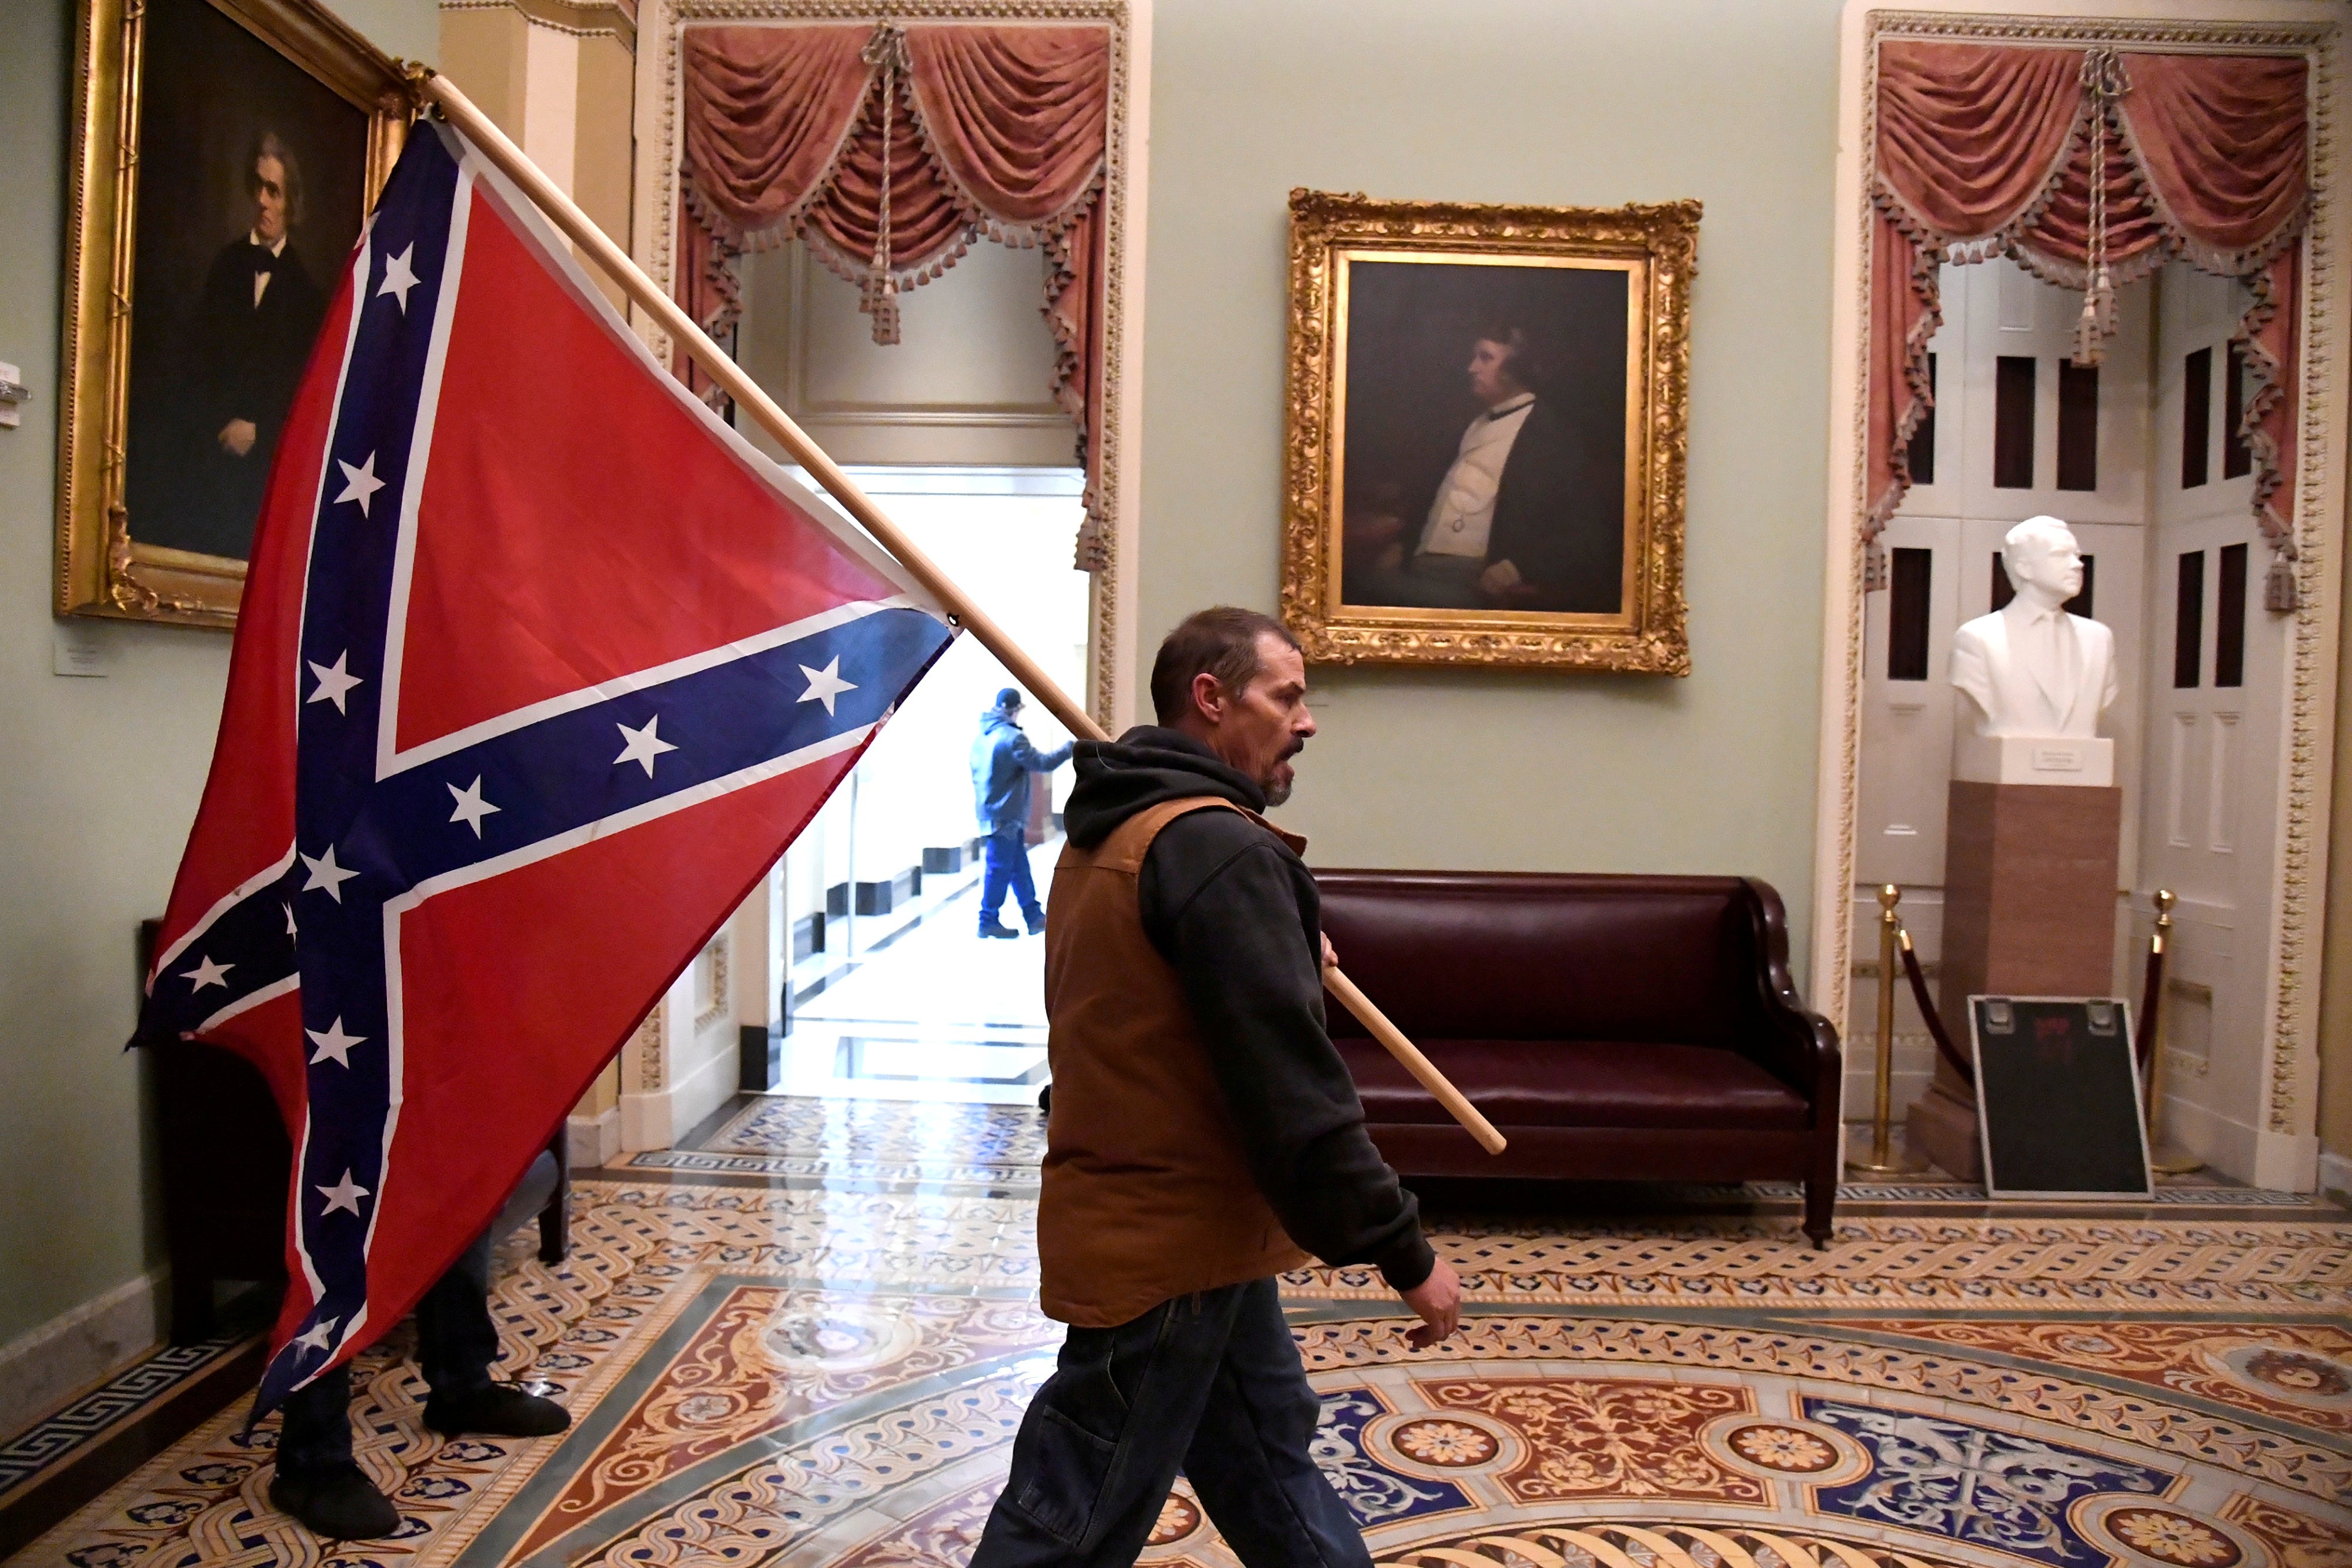 A pro-Trump rioter carries a Confederate flag through the halls of the Capitol on Wednesday